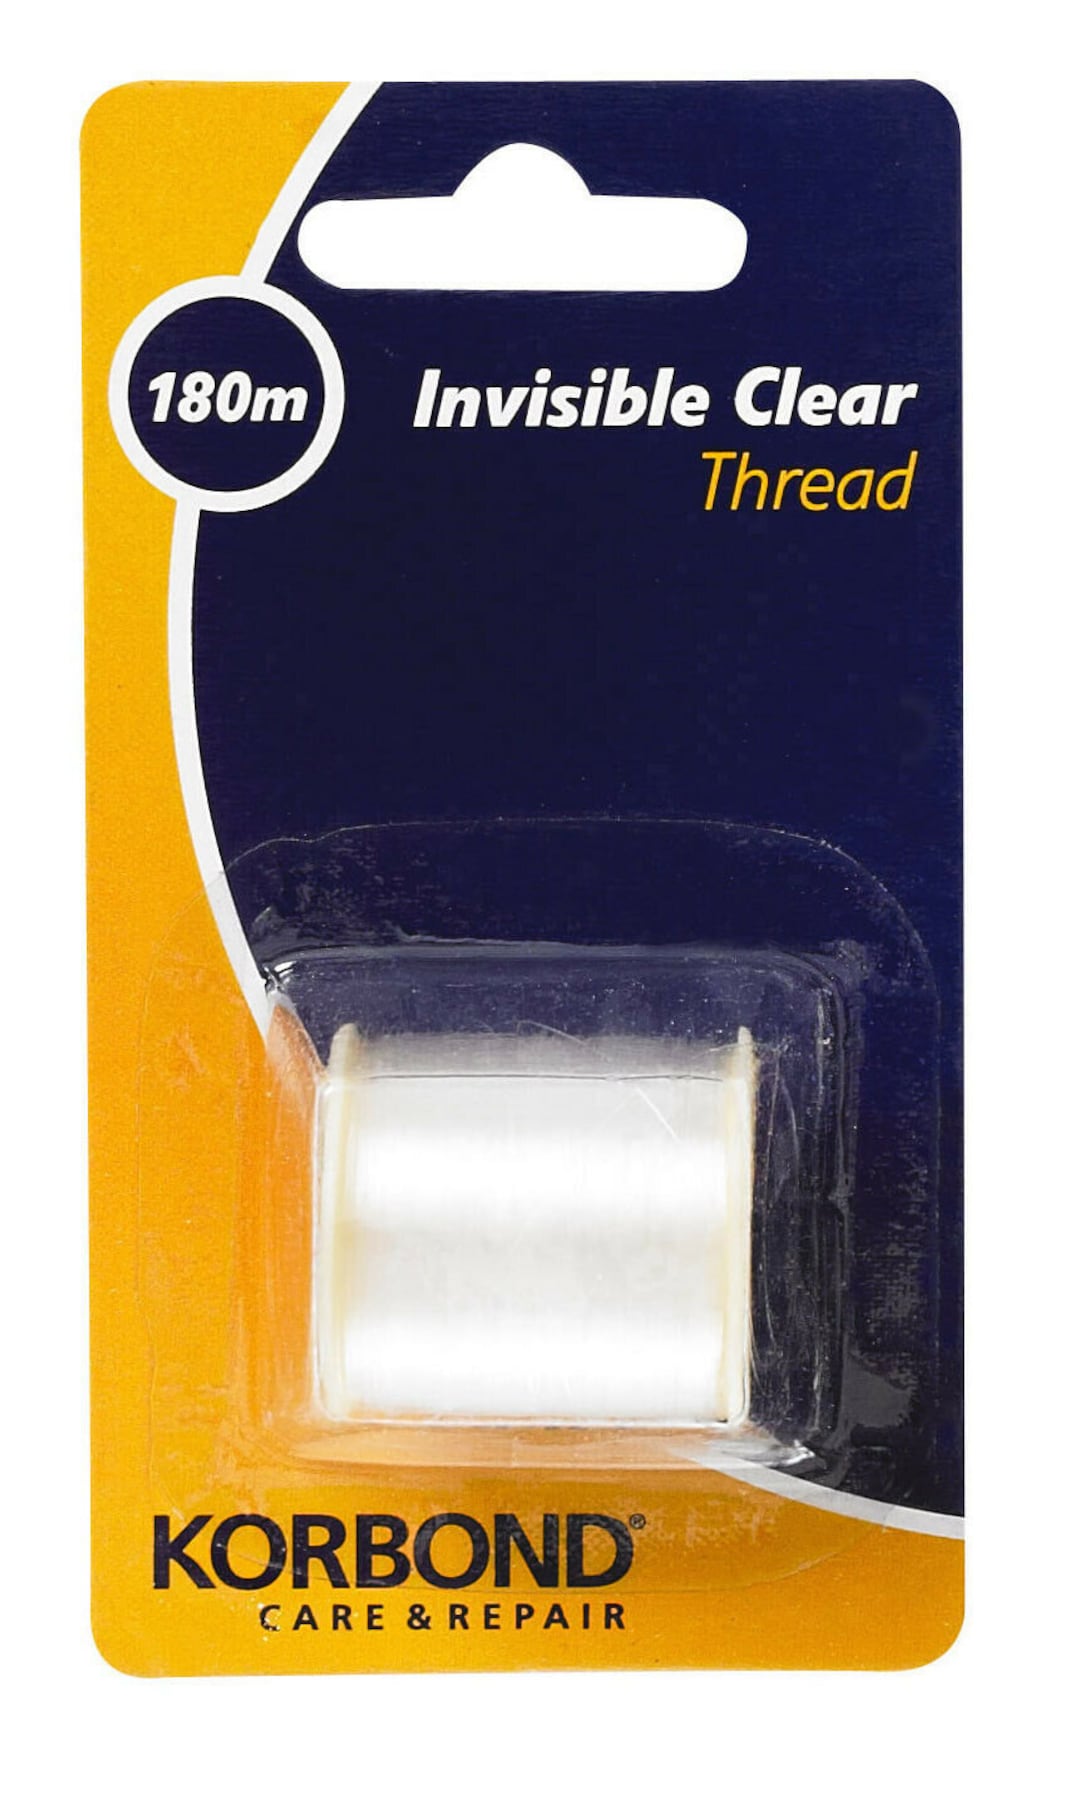 Korbond Invisible Clear Thread 180m Reel Sewing Beading Craft Work